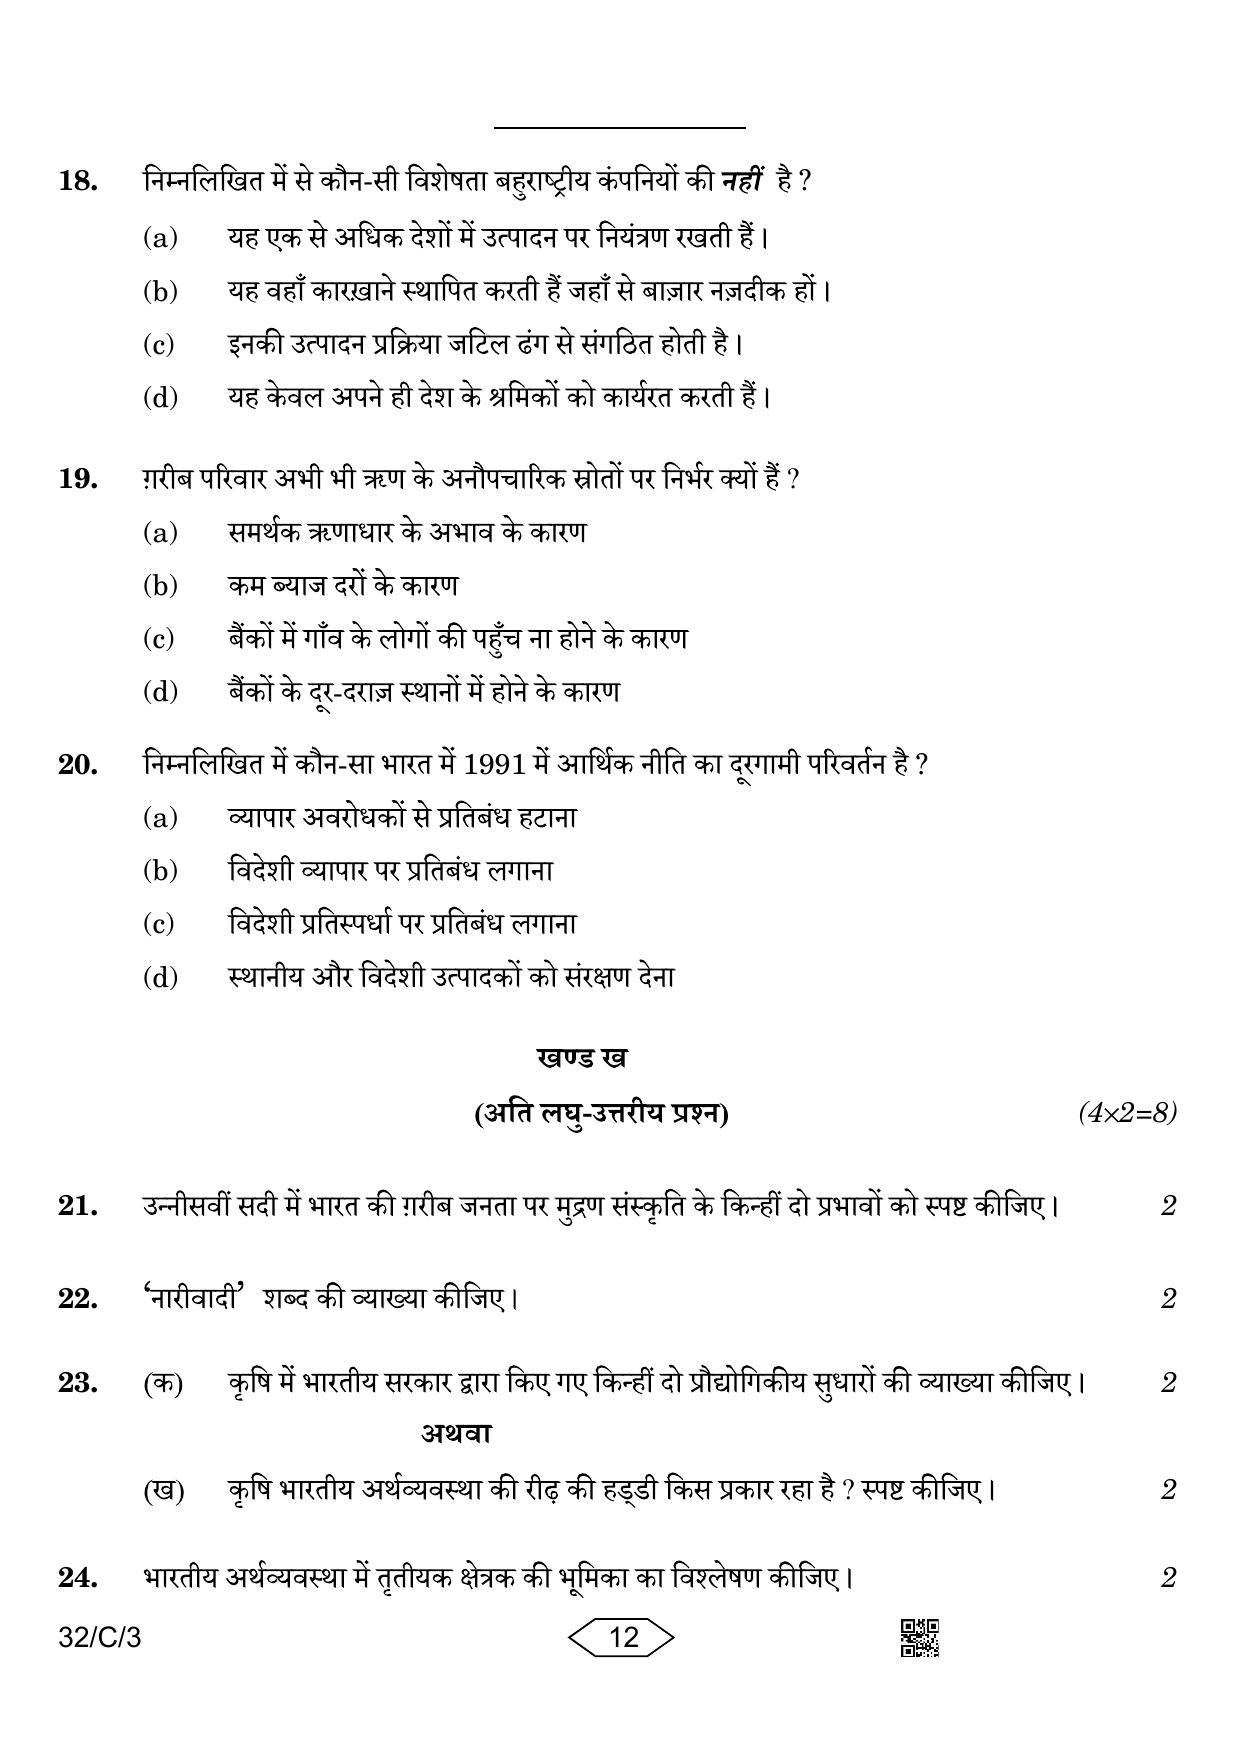 CBSE Class 10 32-3 Social Science 2023 (Compartment) Question Paper - Page 12